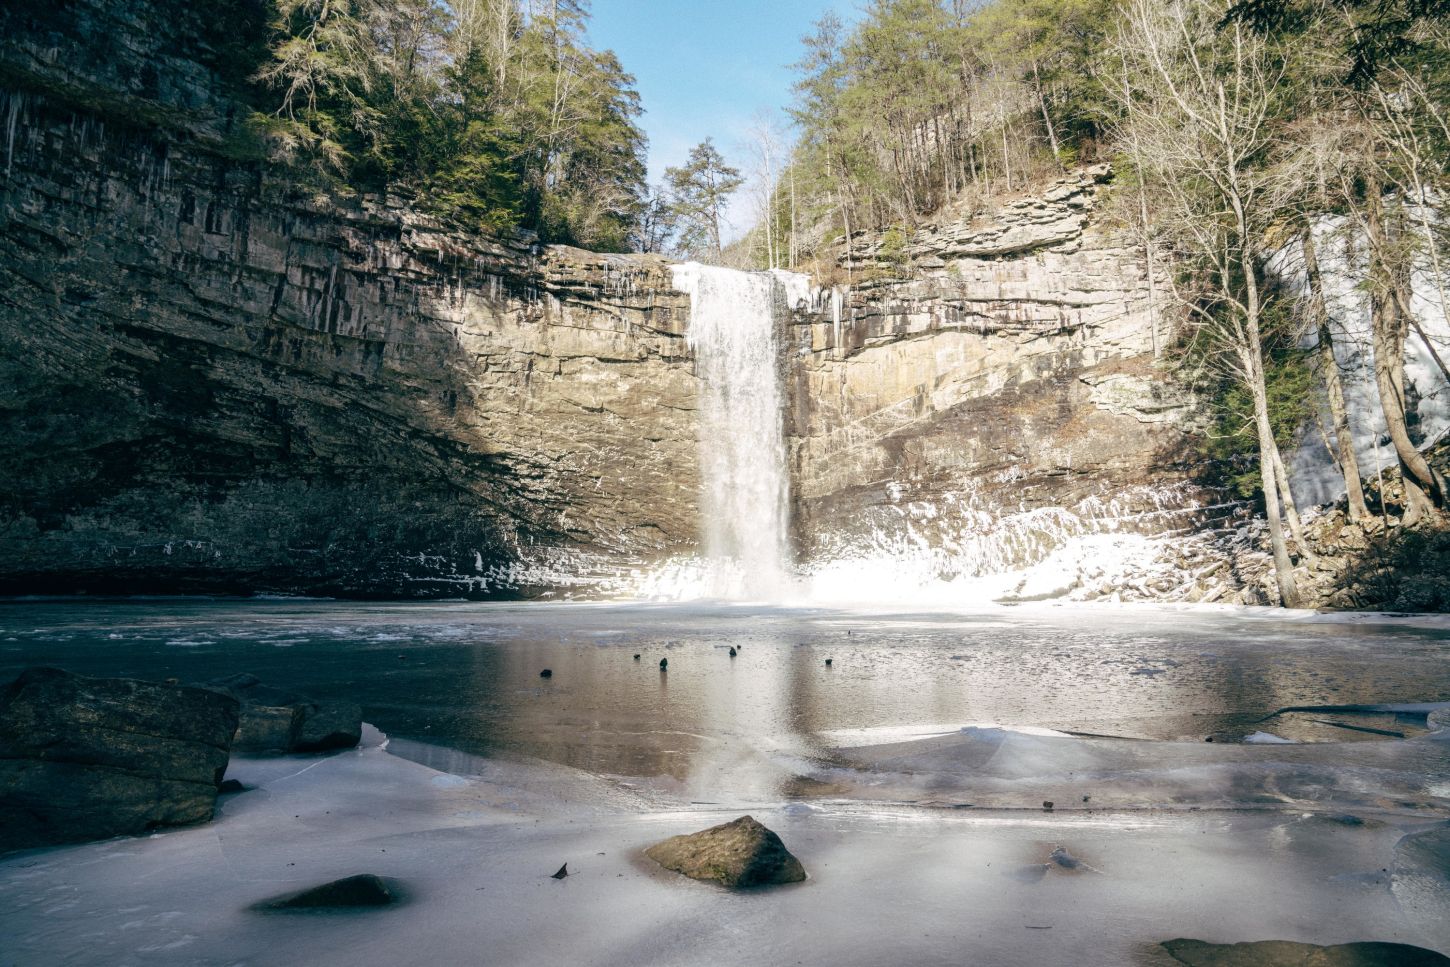  Foster Falls im Winter - Marion County, Tennessee  